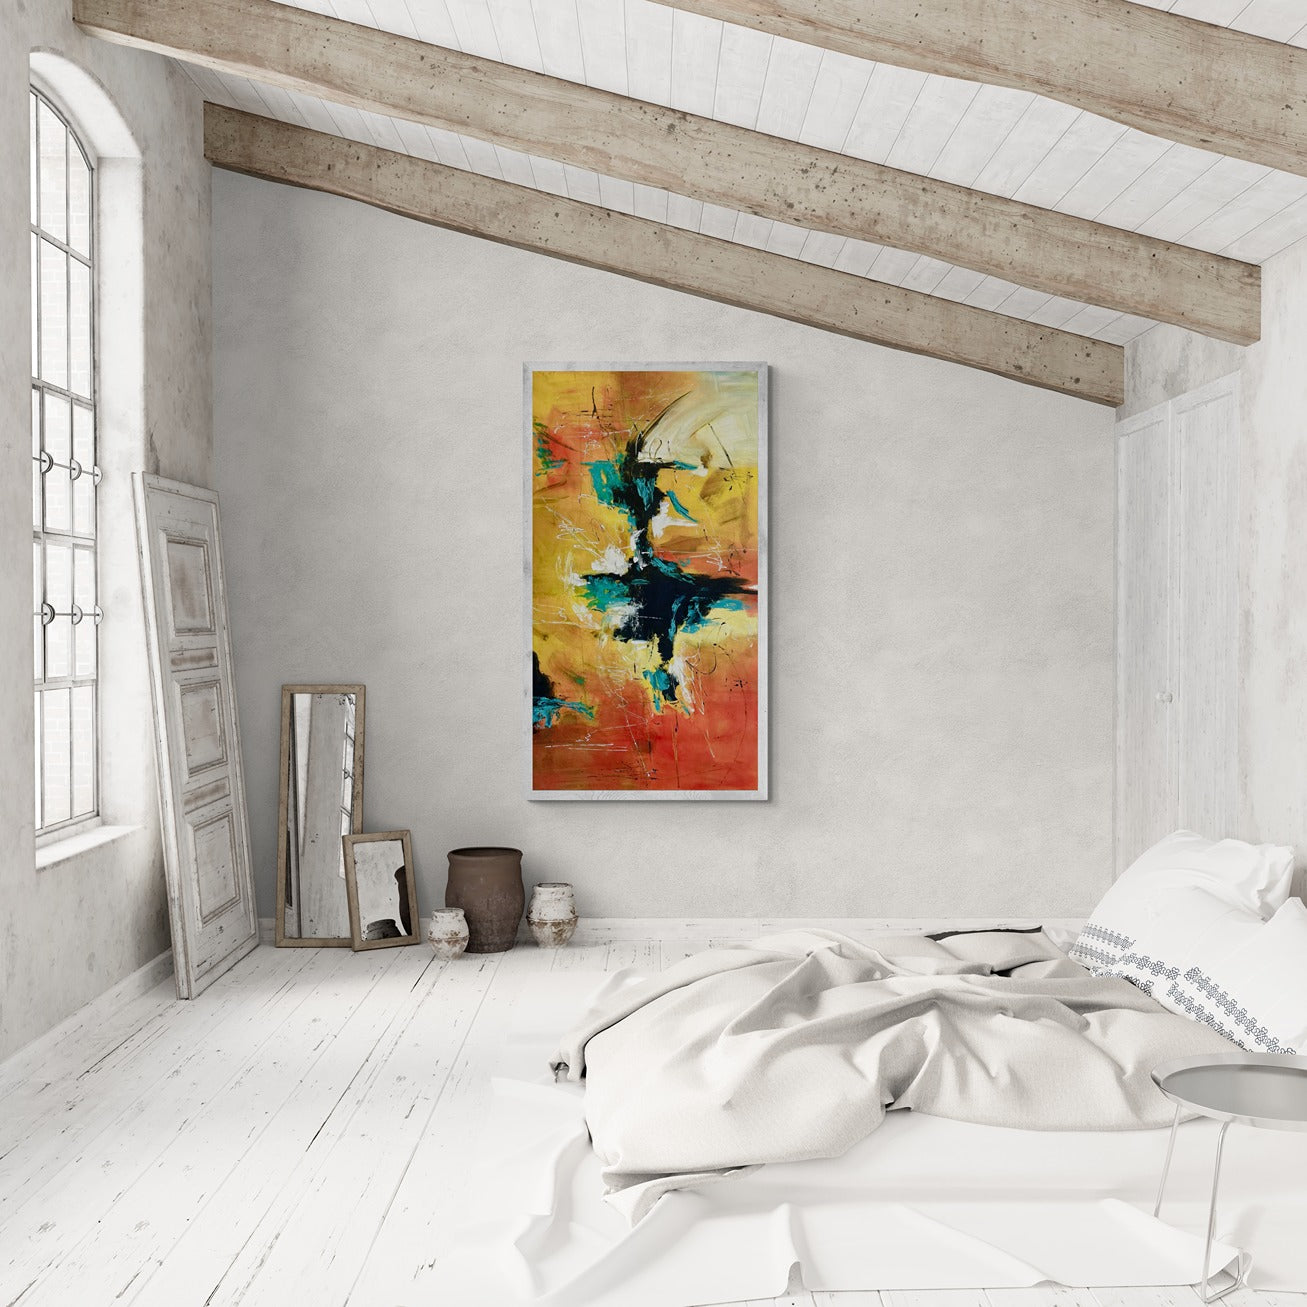 Original hand-painted abstract canvas wall art accentuates the spaciousness of a large industrial loft bedroom, infusing artistic flair into the urban decor.